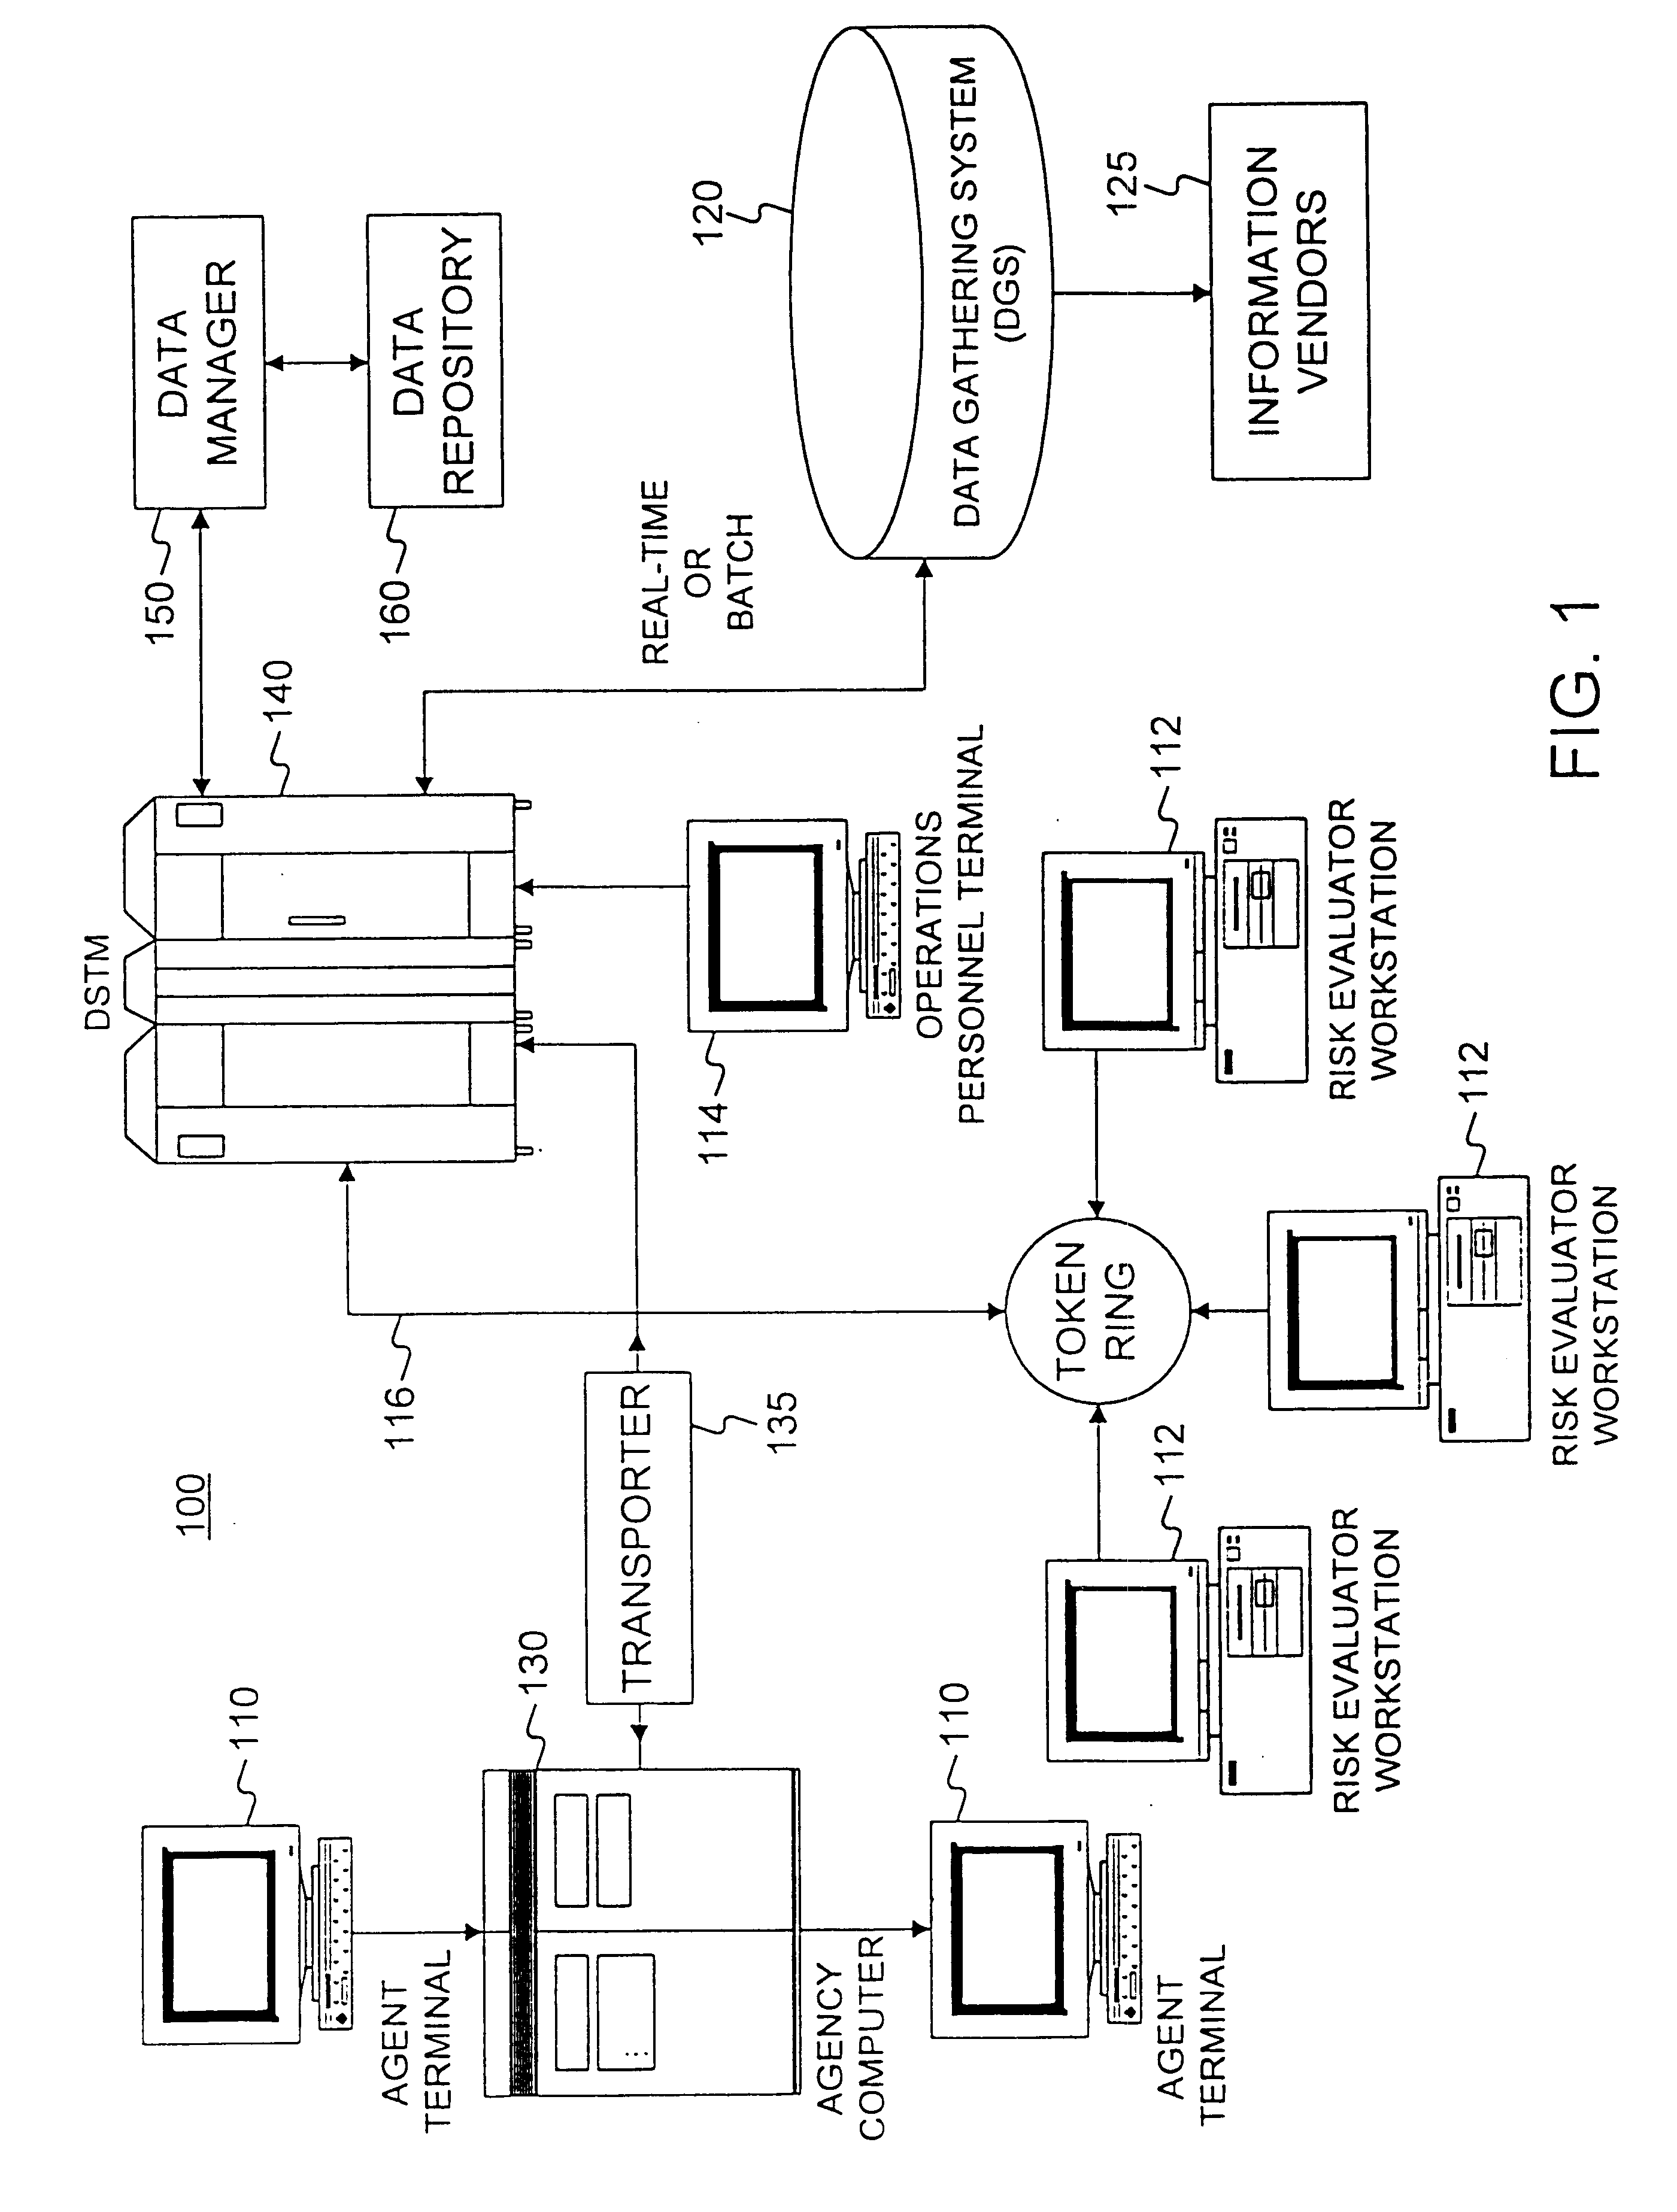 Method and apparatus for obtaining data from vendors in real time